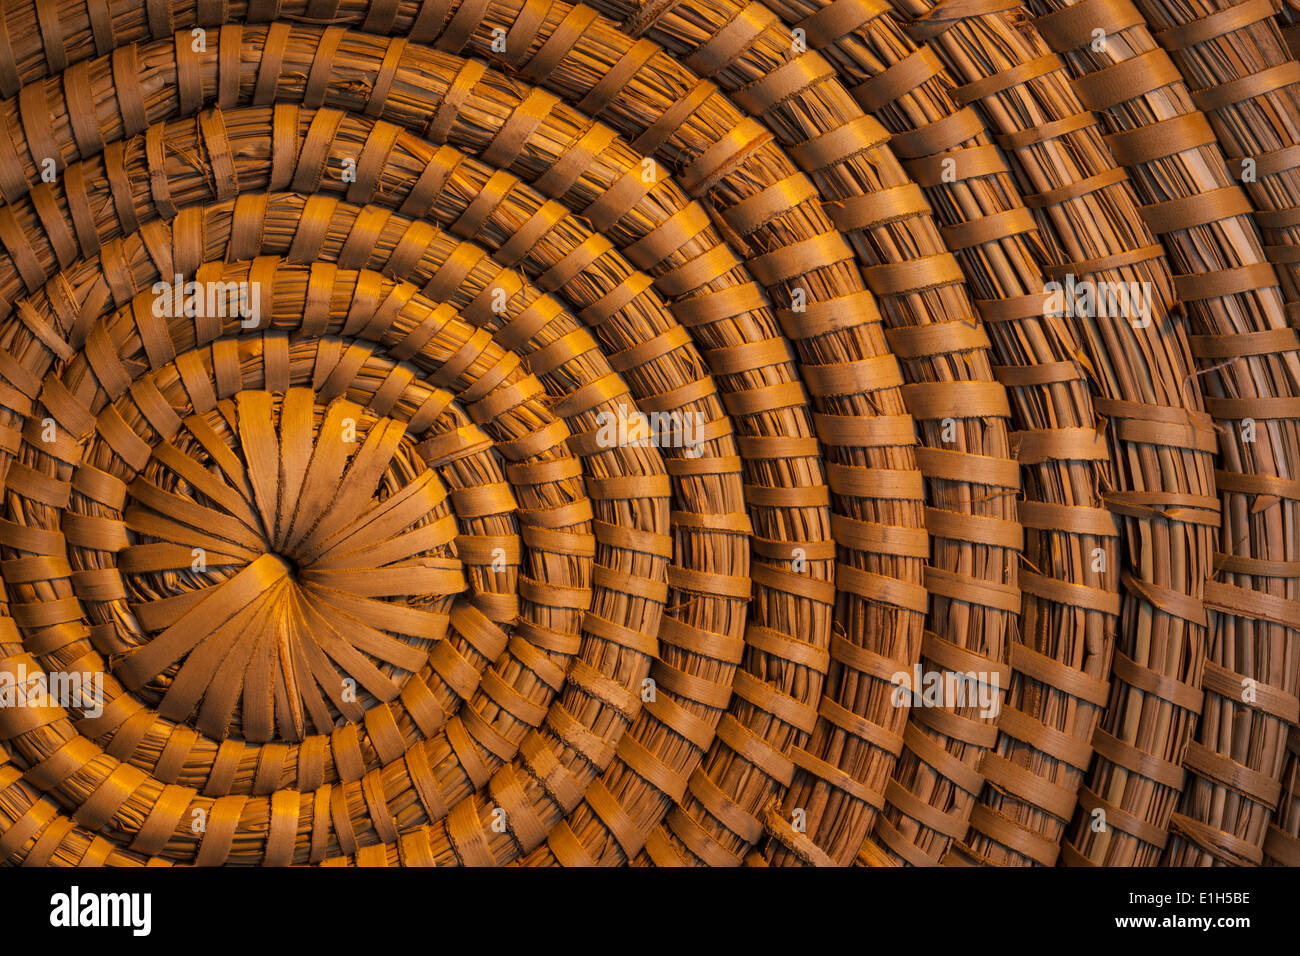 Background - Rattan woven into a Spiral Pattern Stock Photo